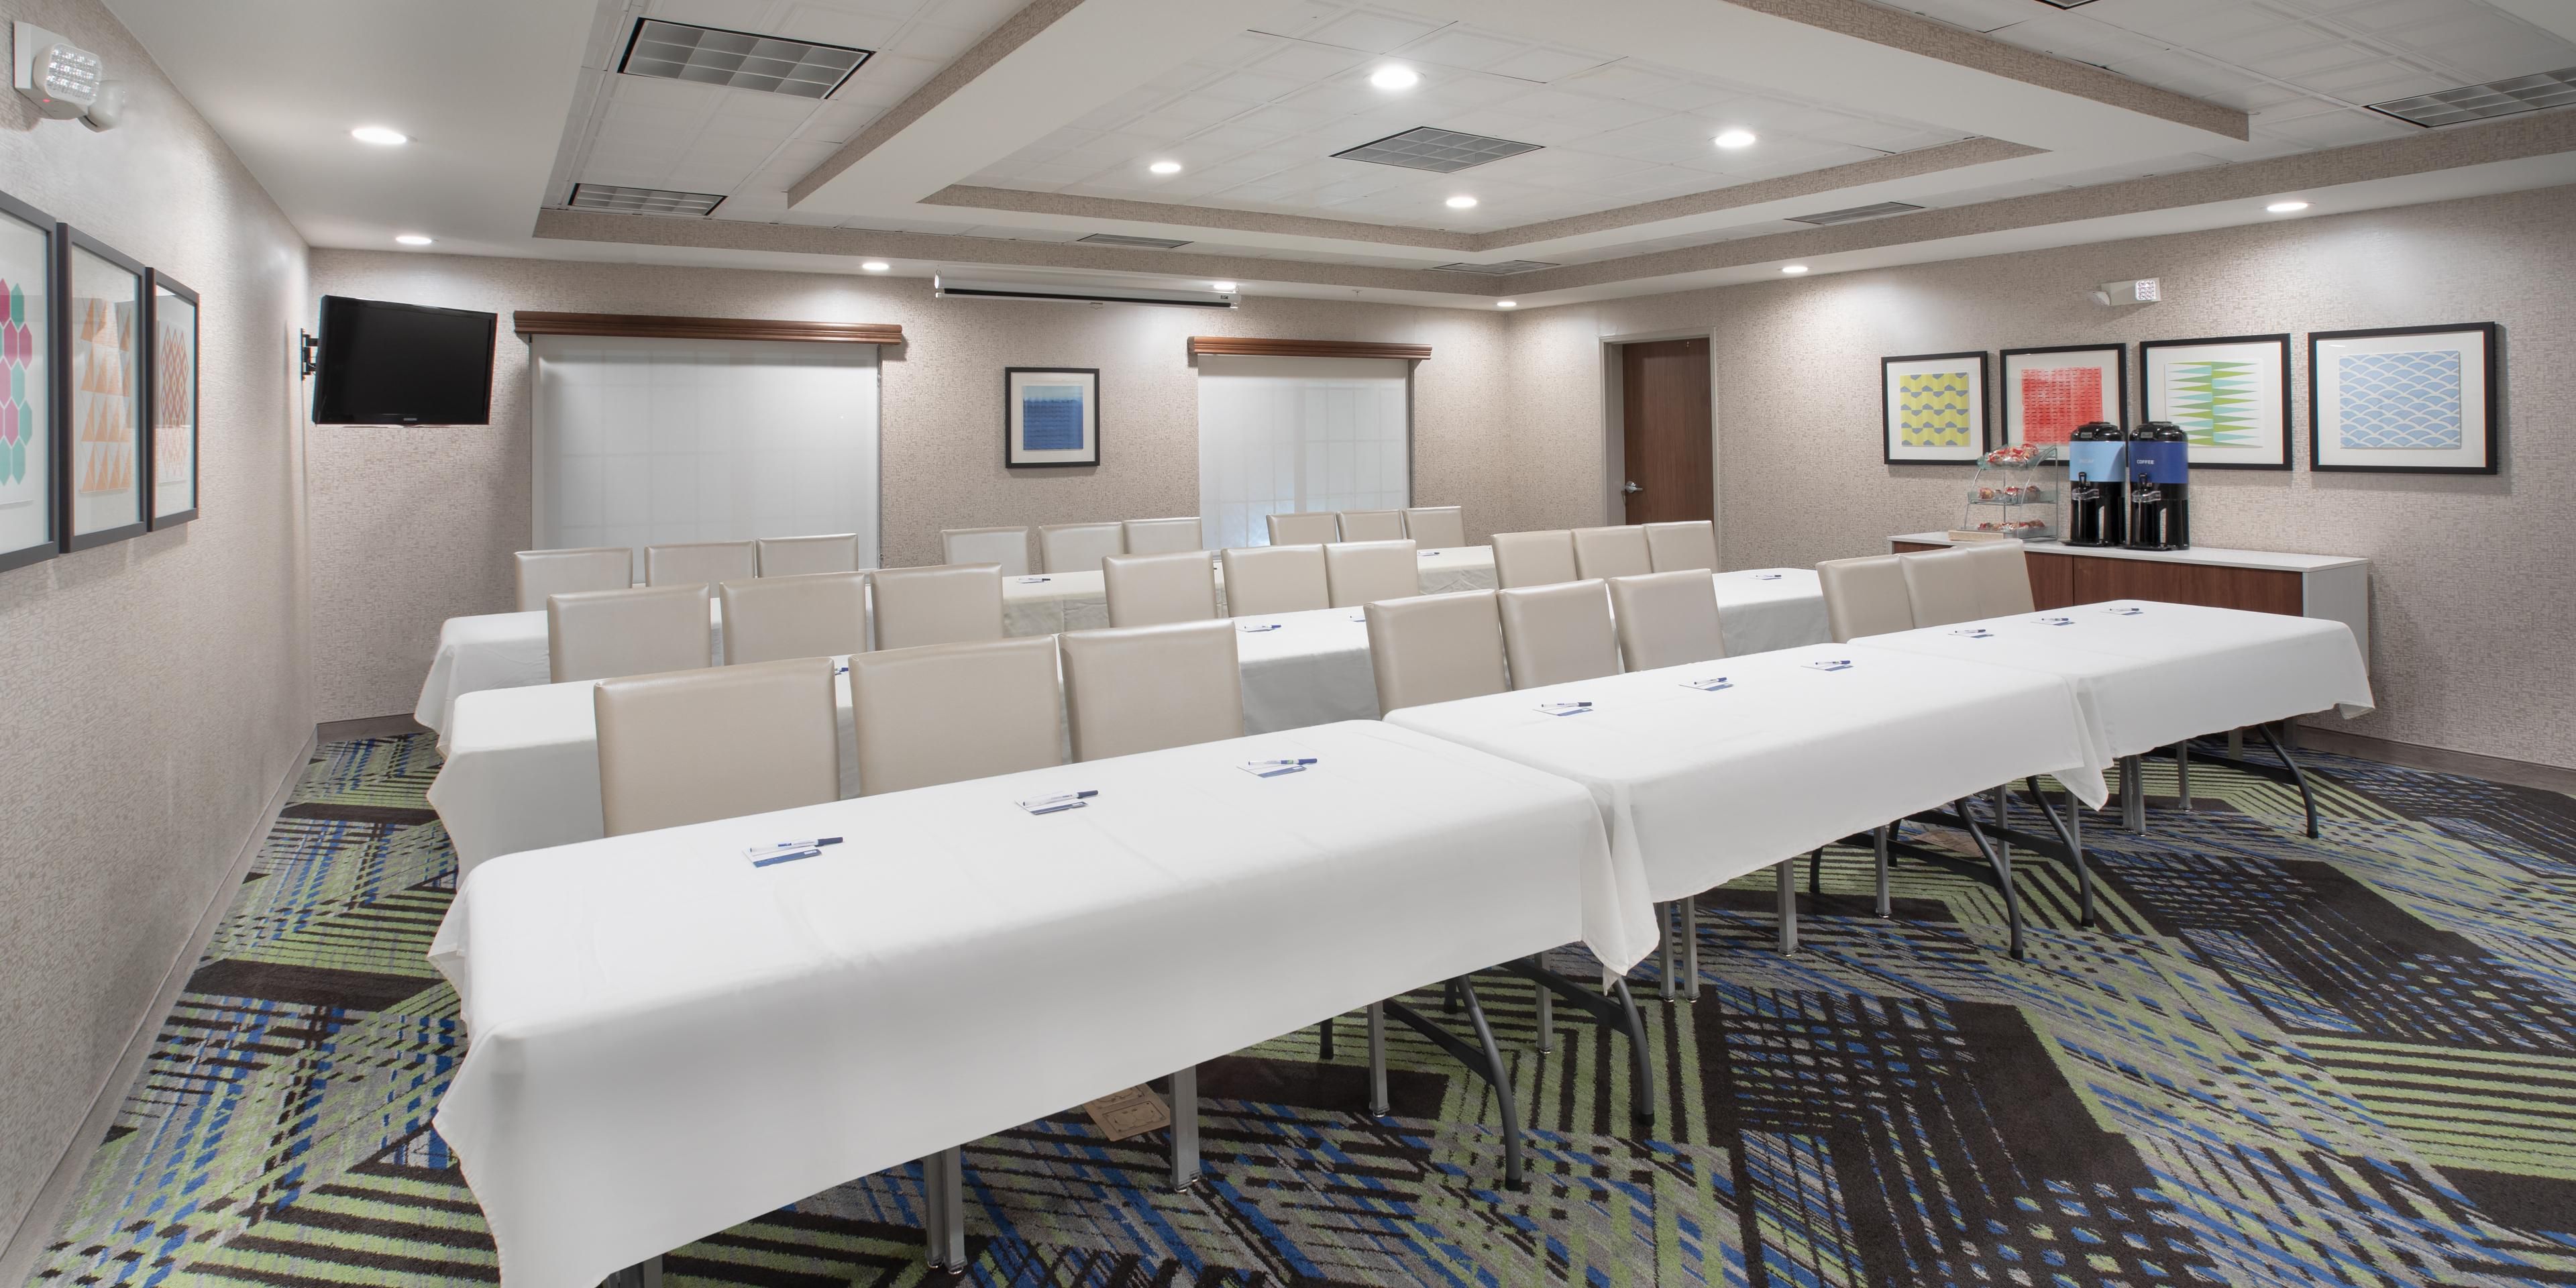 Do you need meeting space in the Longmont - Boulder Area? Let us help. Our event space can hold up to 50 people. Give our meeting professional a call to discuss your next gathering.